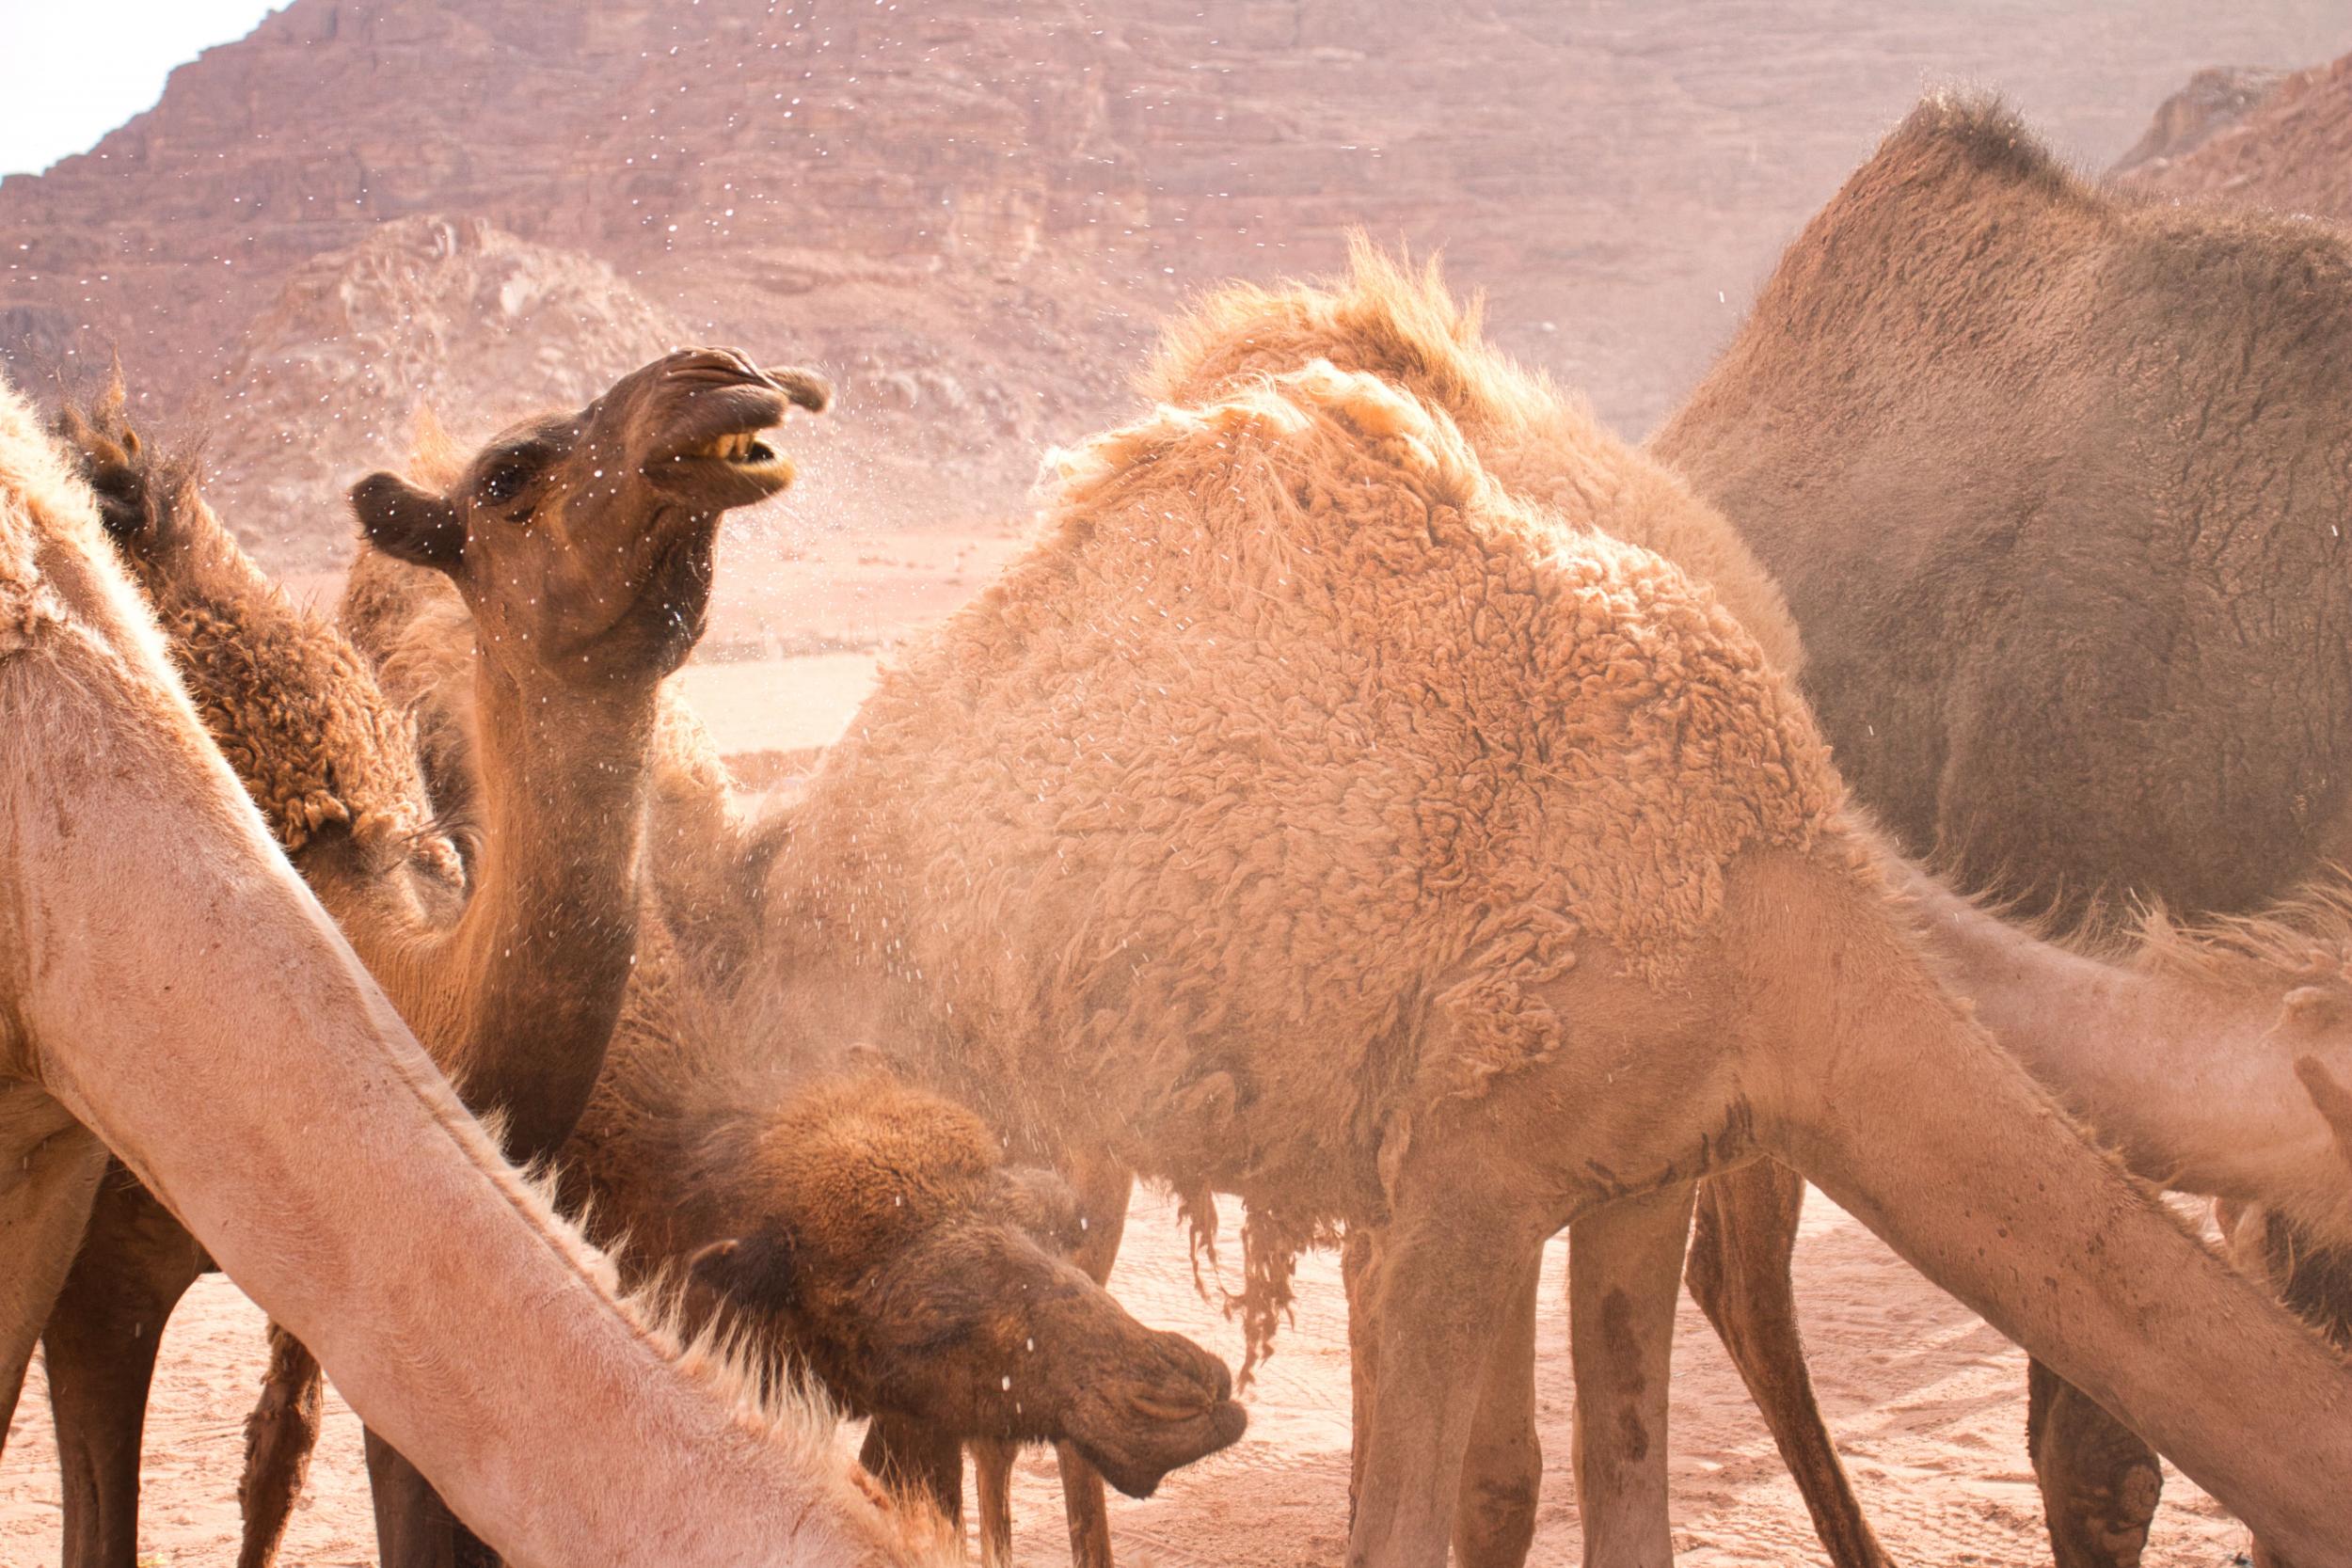 Camels are part of desert living